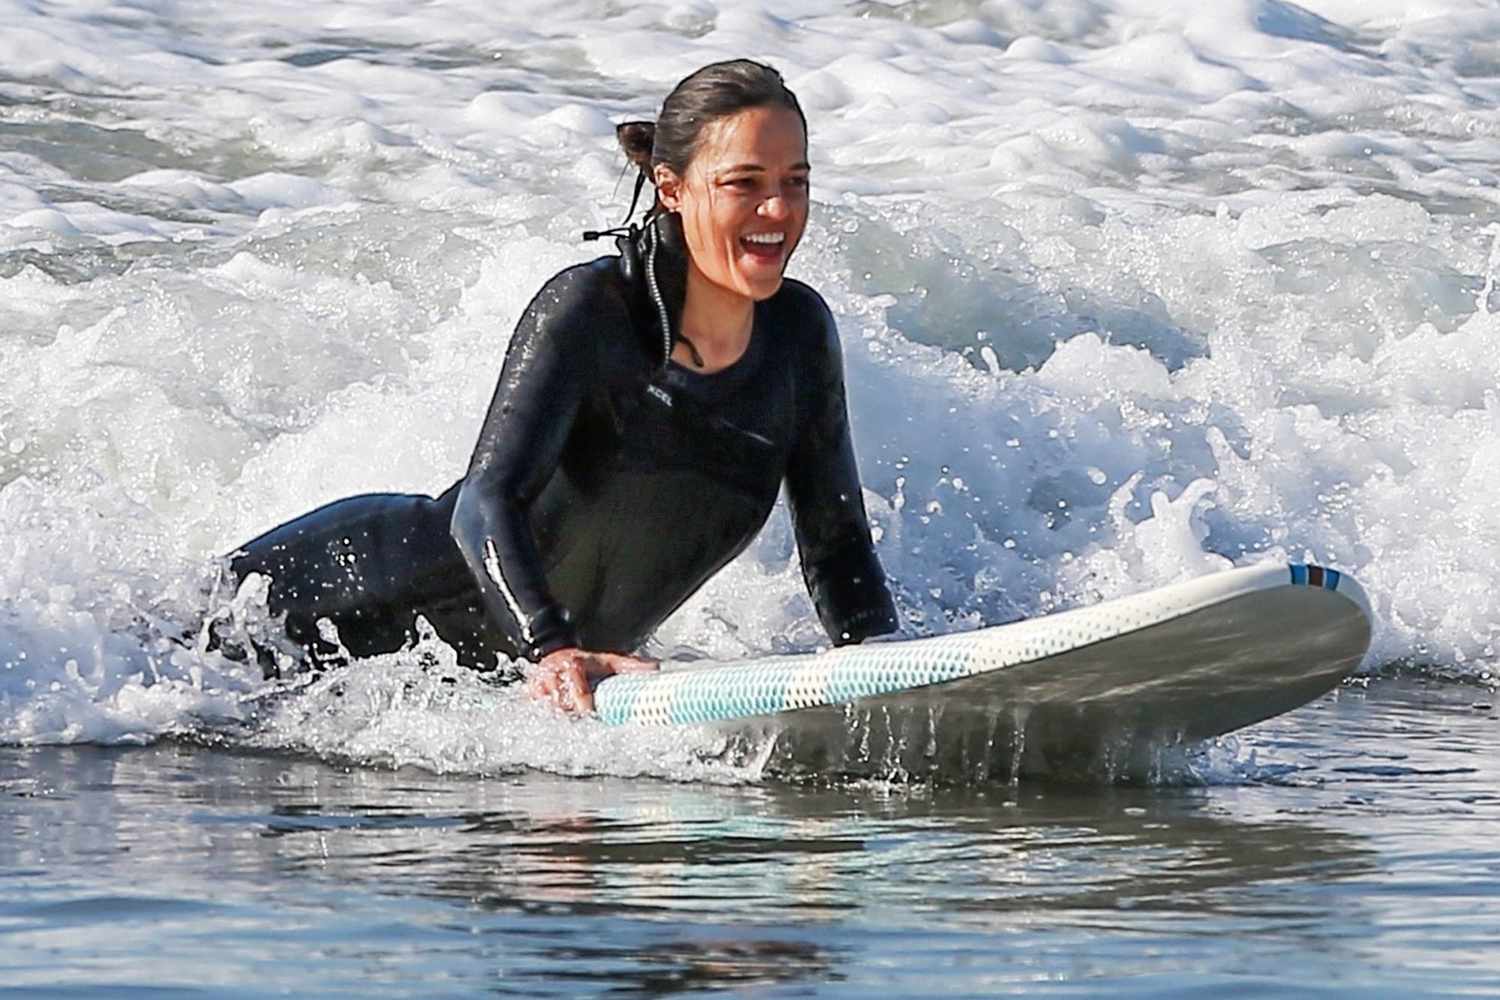 Michelle Rodriguez goes surfing with friends in Malibu